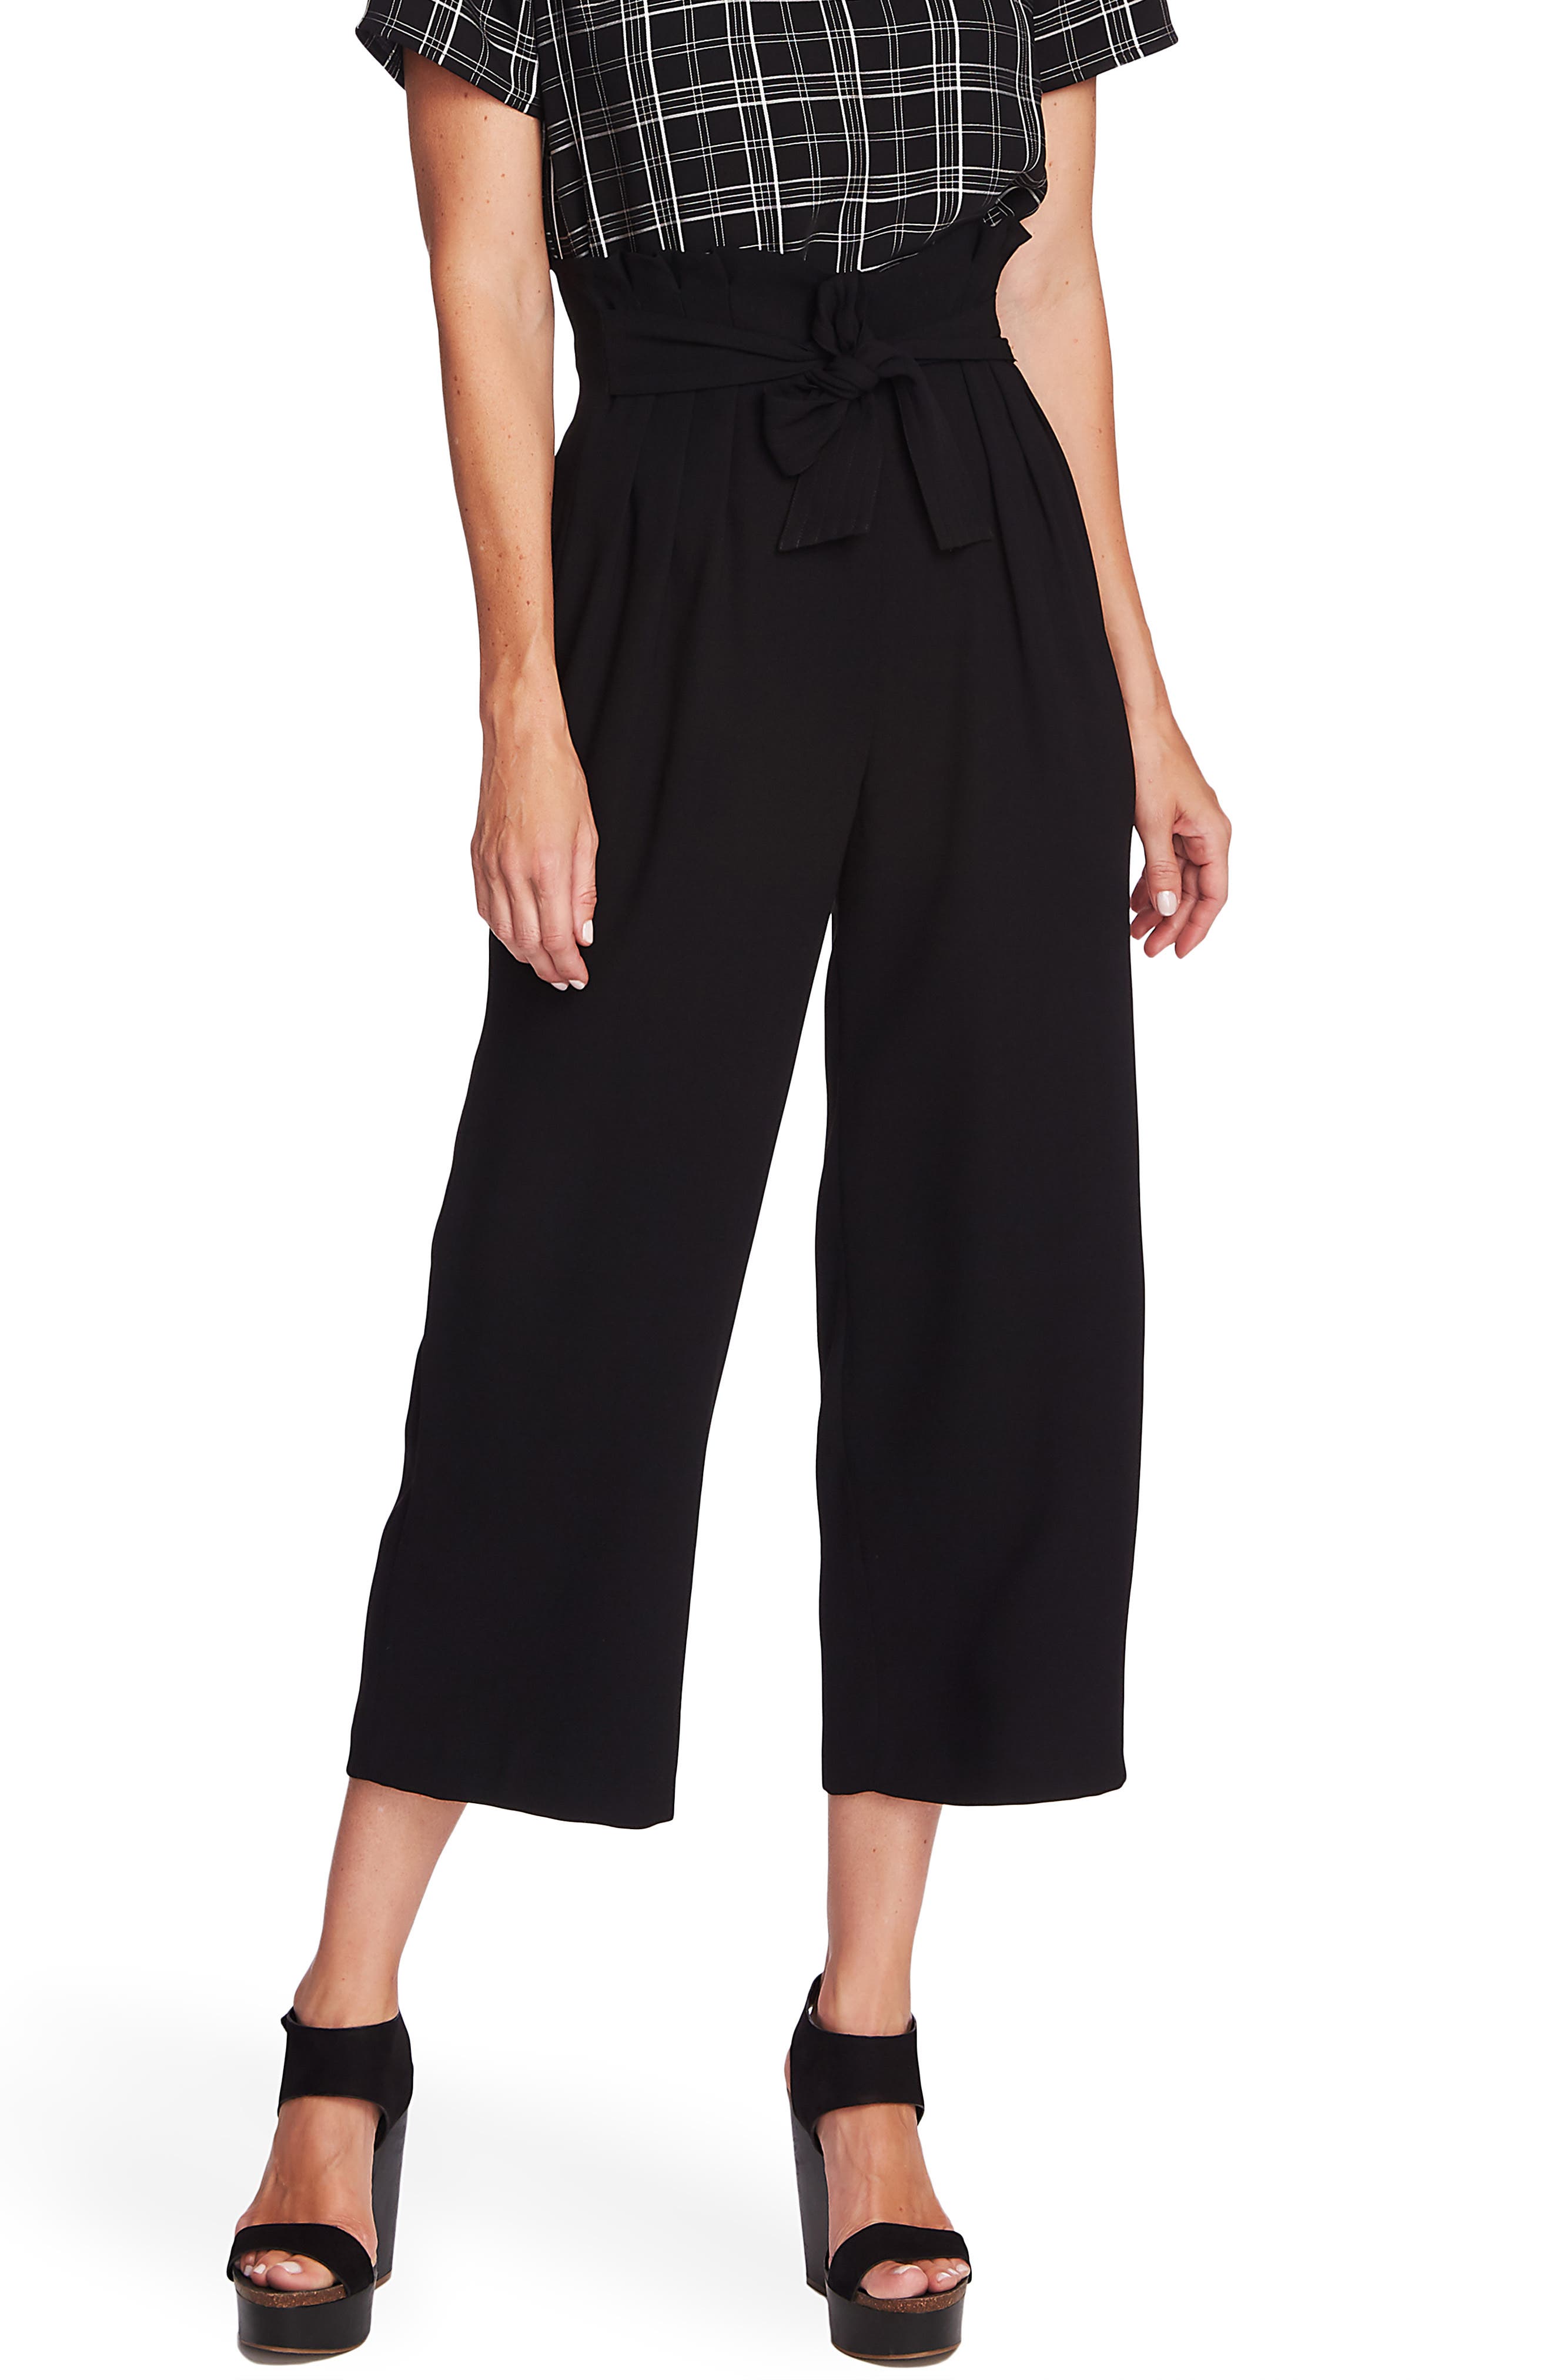 UPC 720655783034 product image for Women's Vince Camuto Paperbag Waist Wide Leg Matte Crepe Trousers, Size 6 - Blac | upcitemdb.com